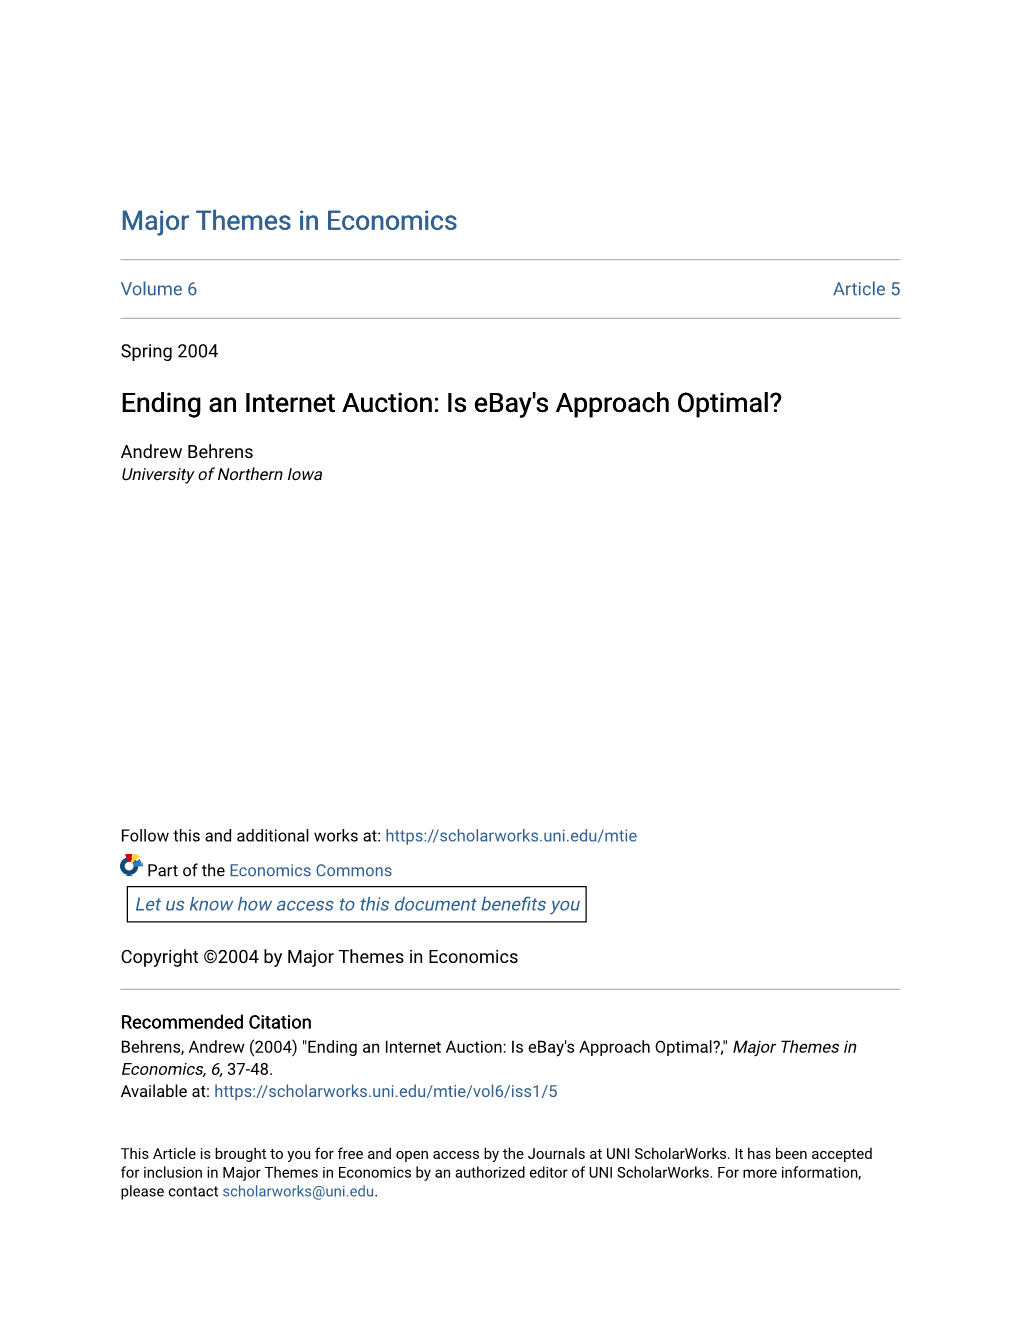 Ending an Internet Auction: Is Ebay's Approach Optimal?